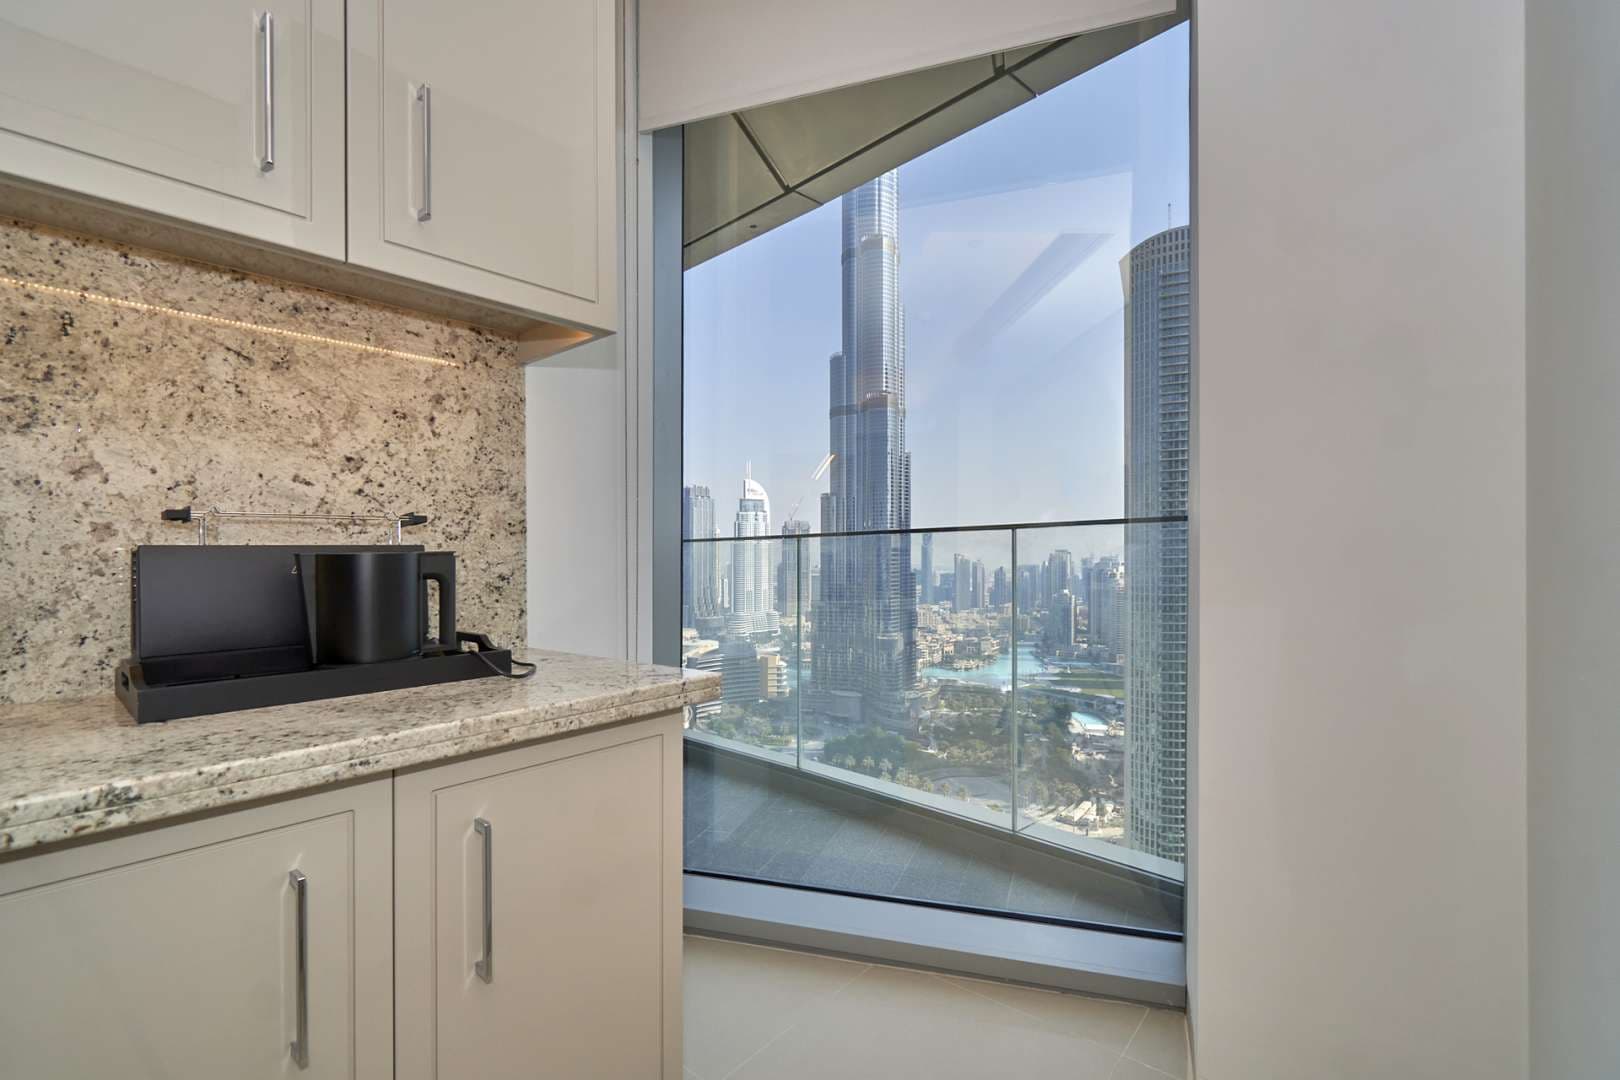 3 Bedroom Apartment For Sale The Address Sky View Towers Lp09314 2fc883887b0b6600.jpg